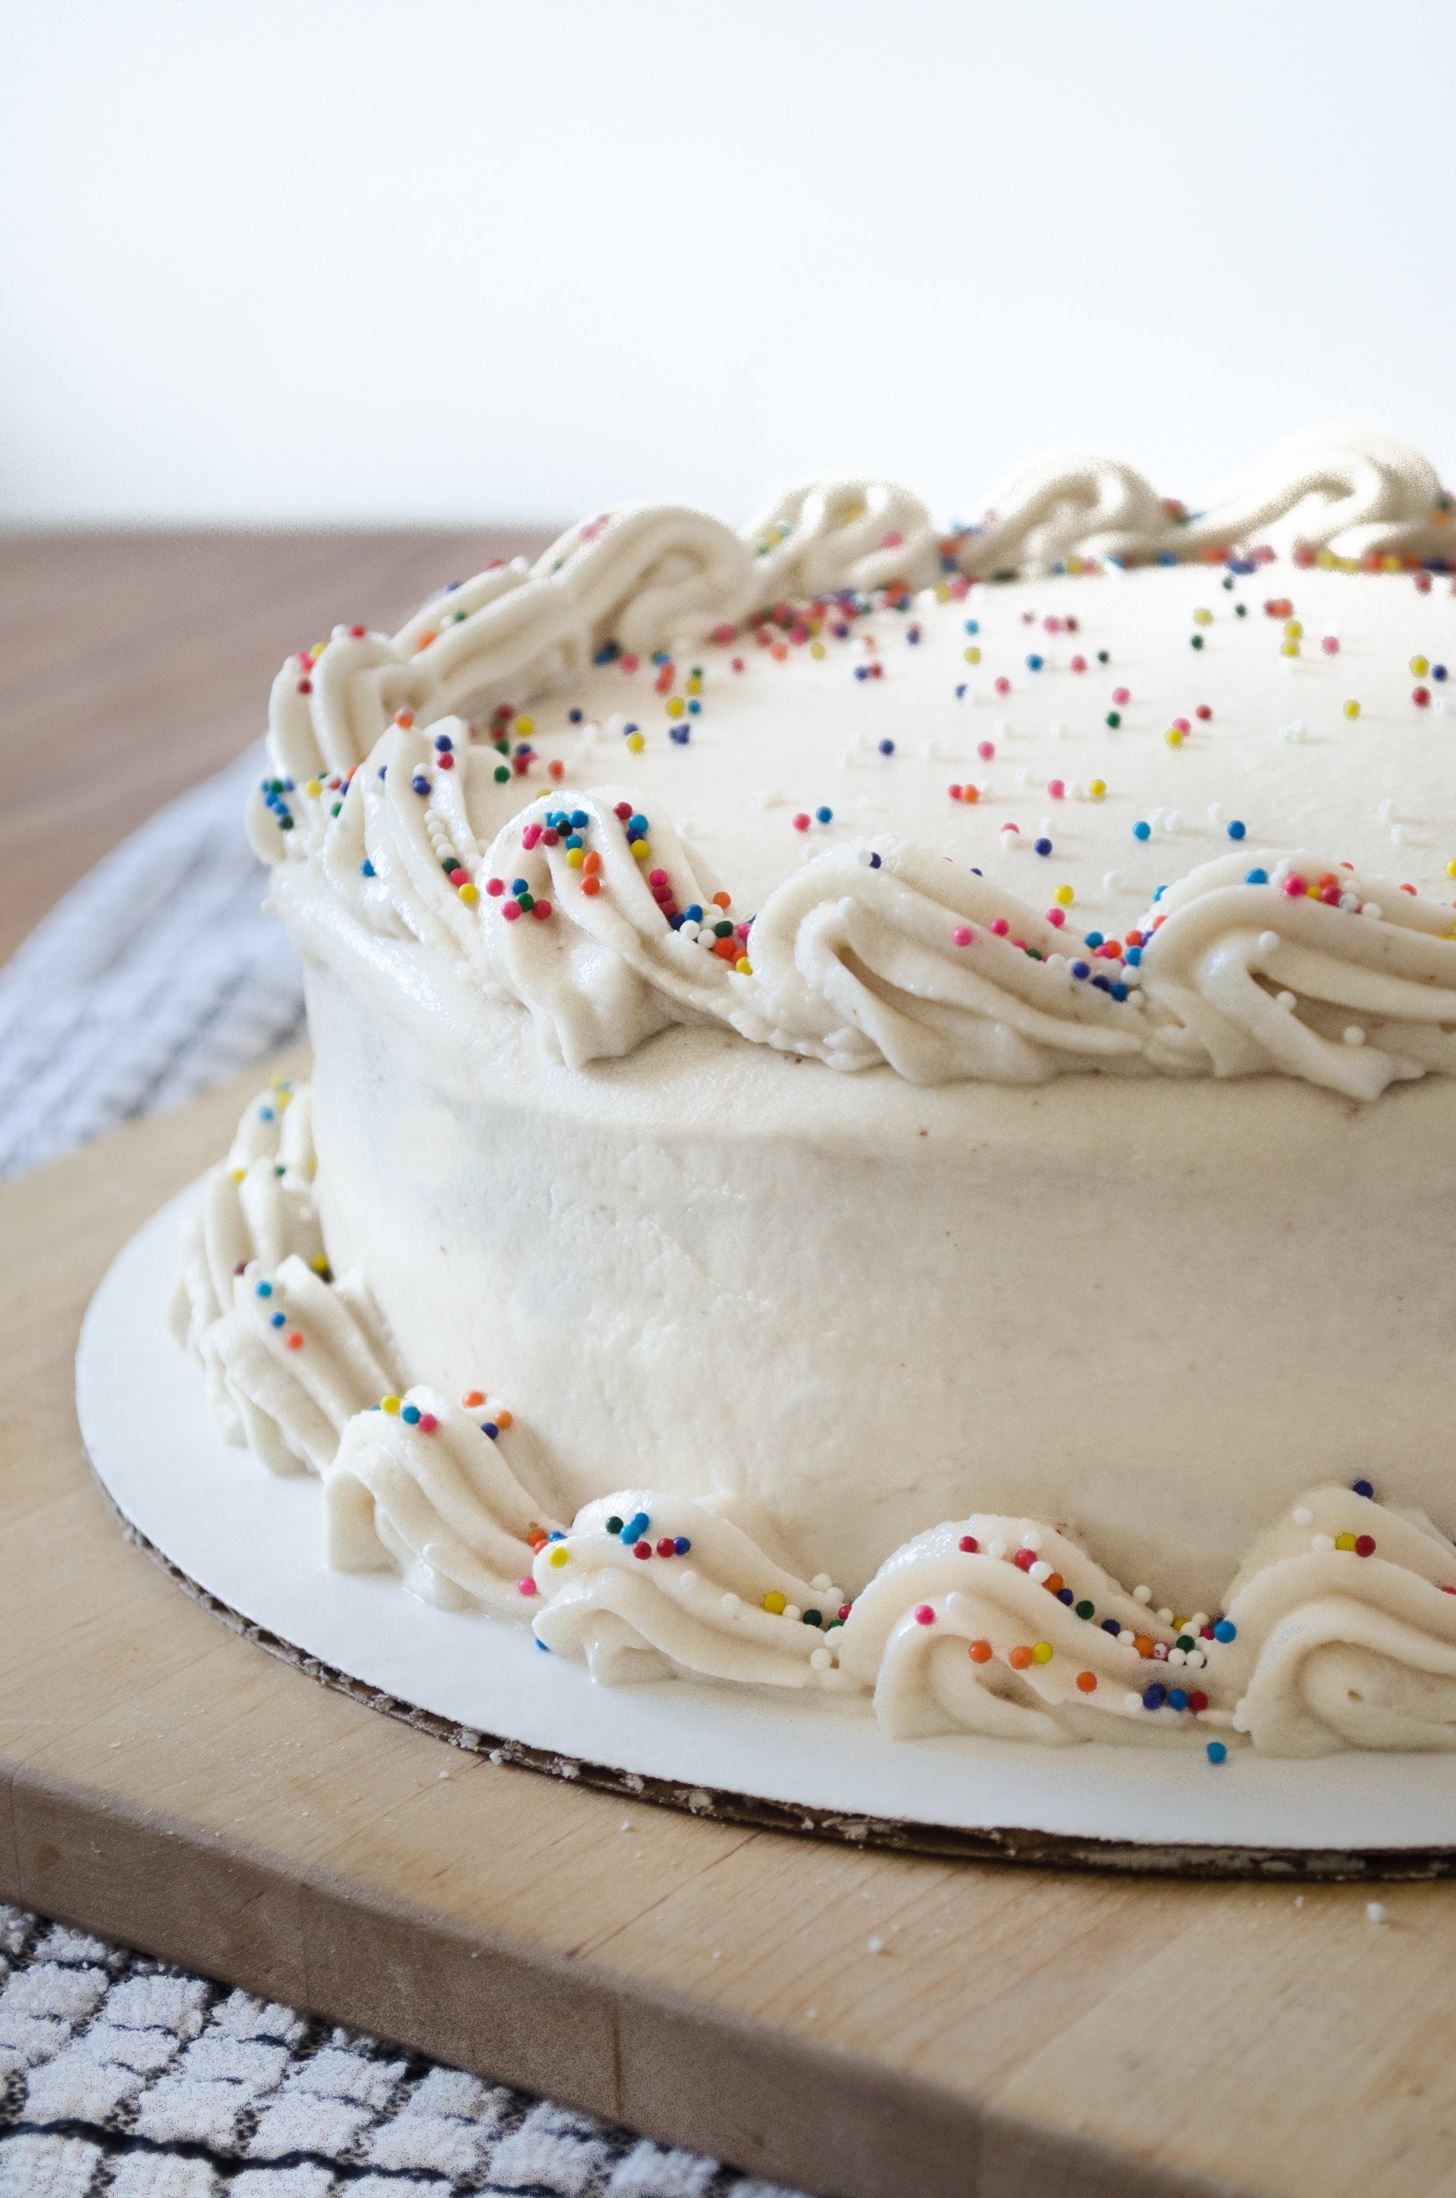 Skip the Fondant—Make Picture-Perfect Cakes with Paper Towels Instead